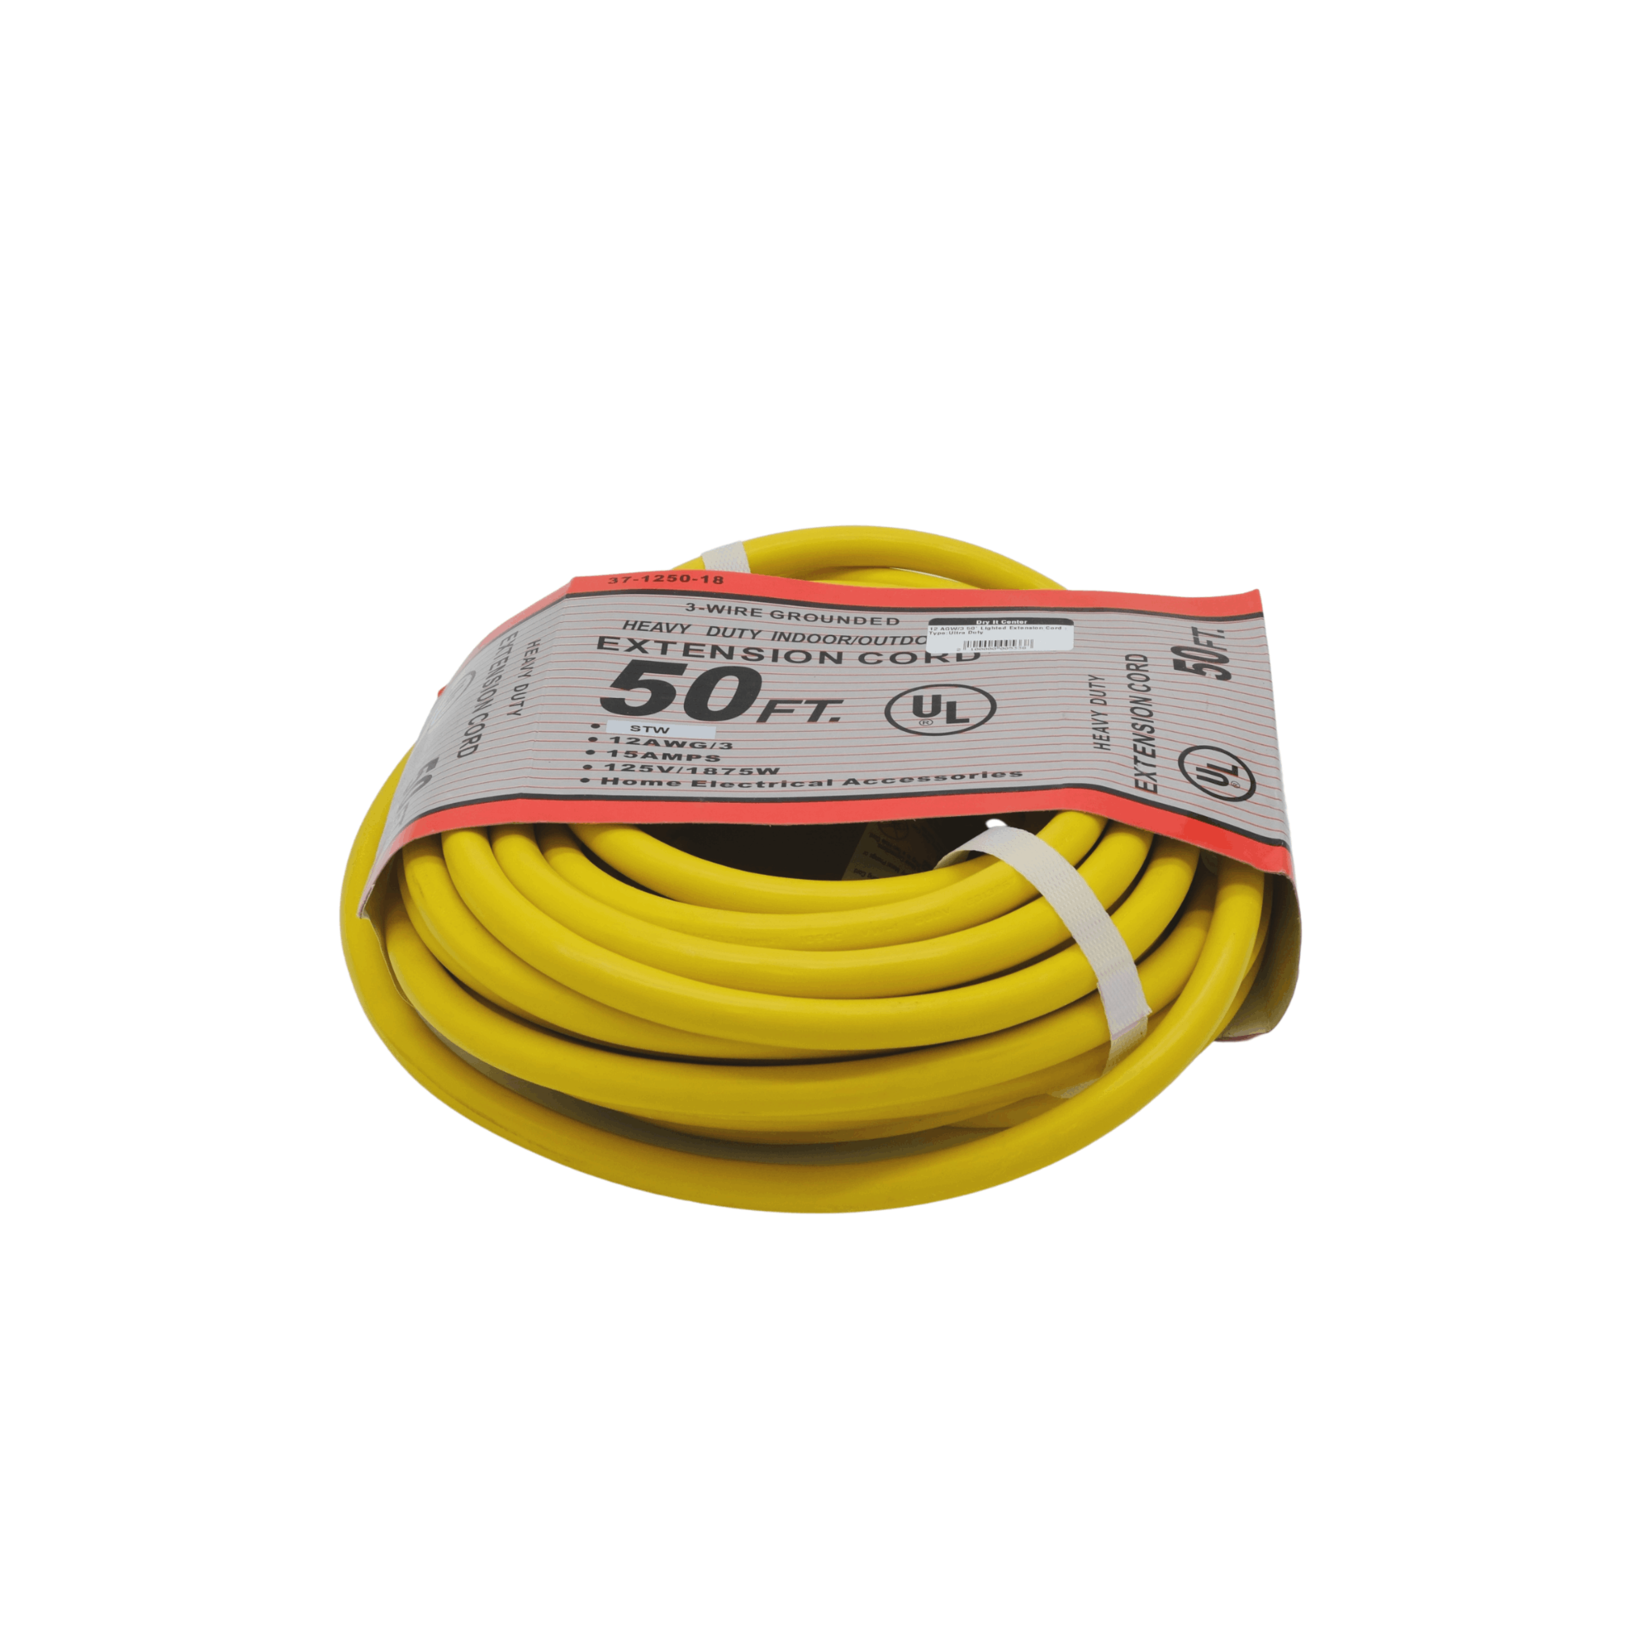 Dry It Center Lighted Extension Cord Ultra Duty 12 AGW/3 50'